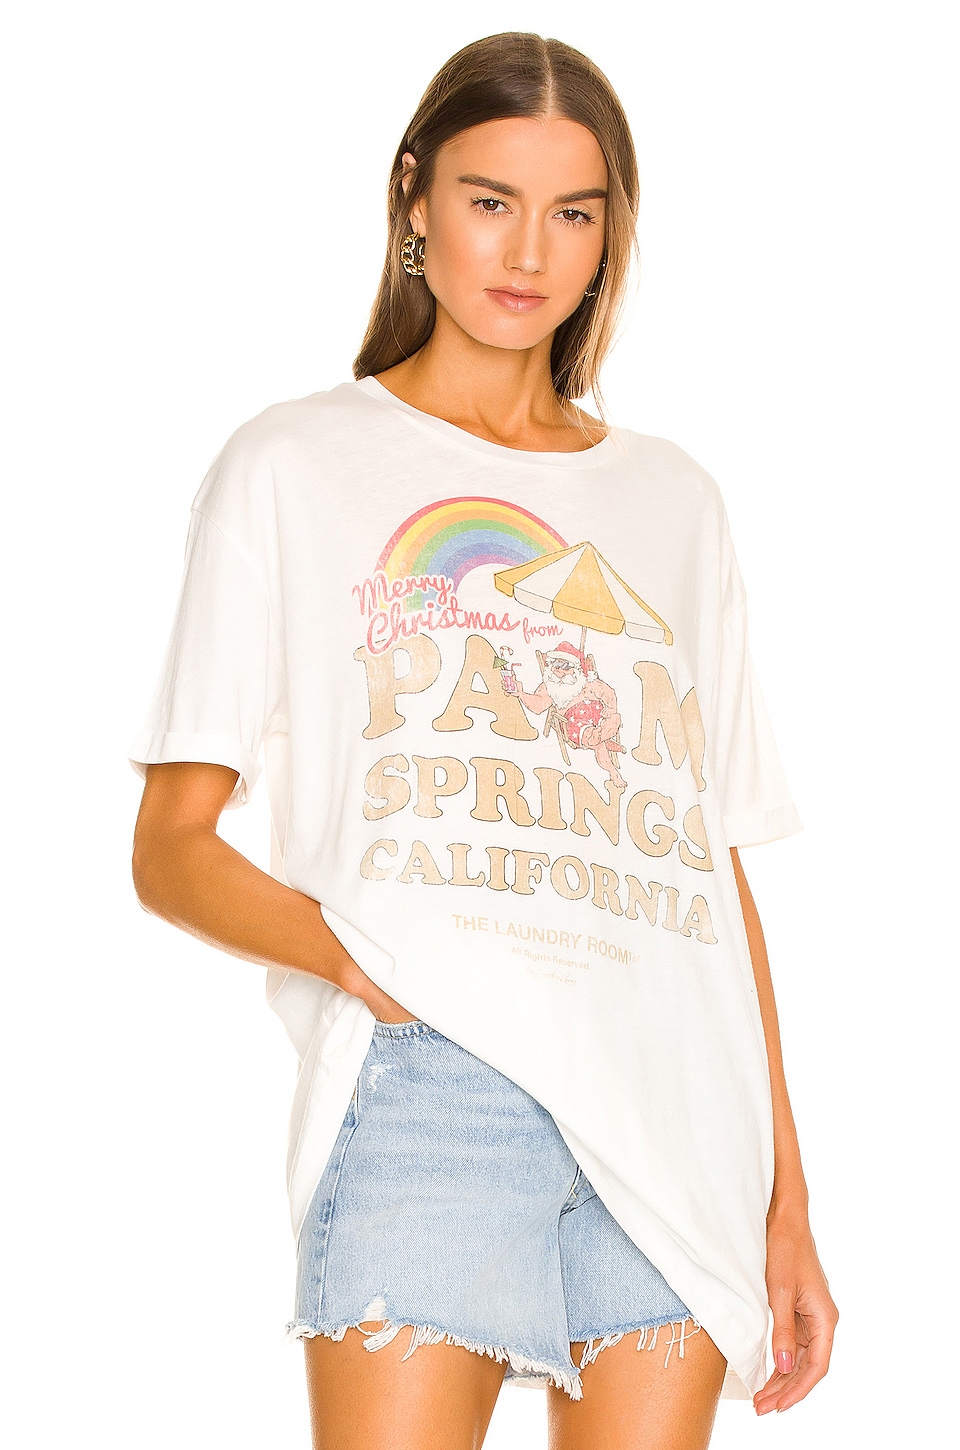 The Laundry Room Palm Springs Christmas Oversized Tee in White